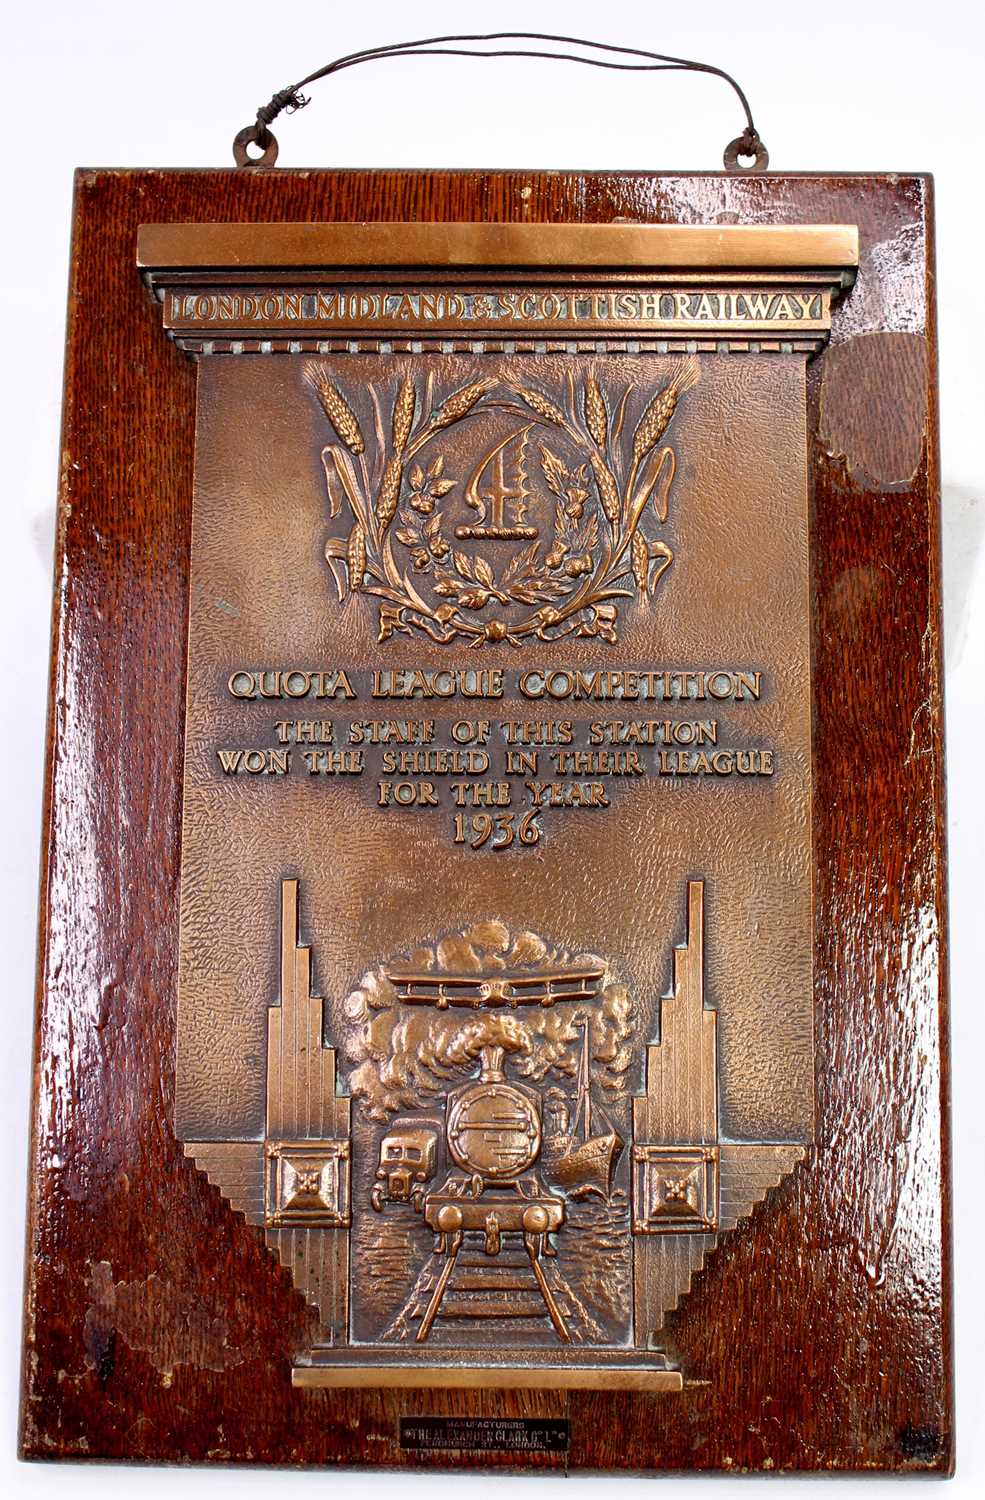 An original London Midland and Scottish Railway bronze quota league competition shield for the